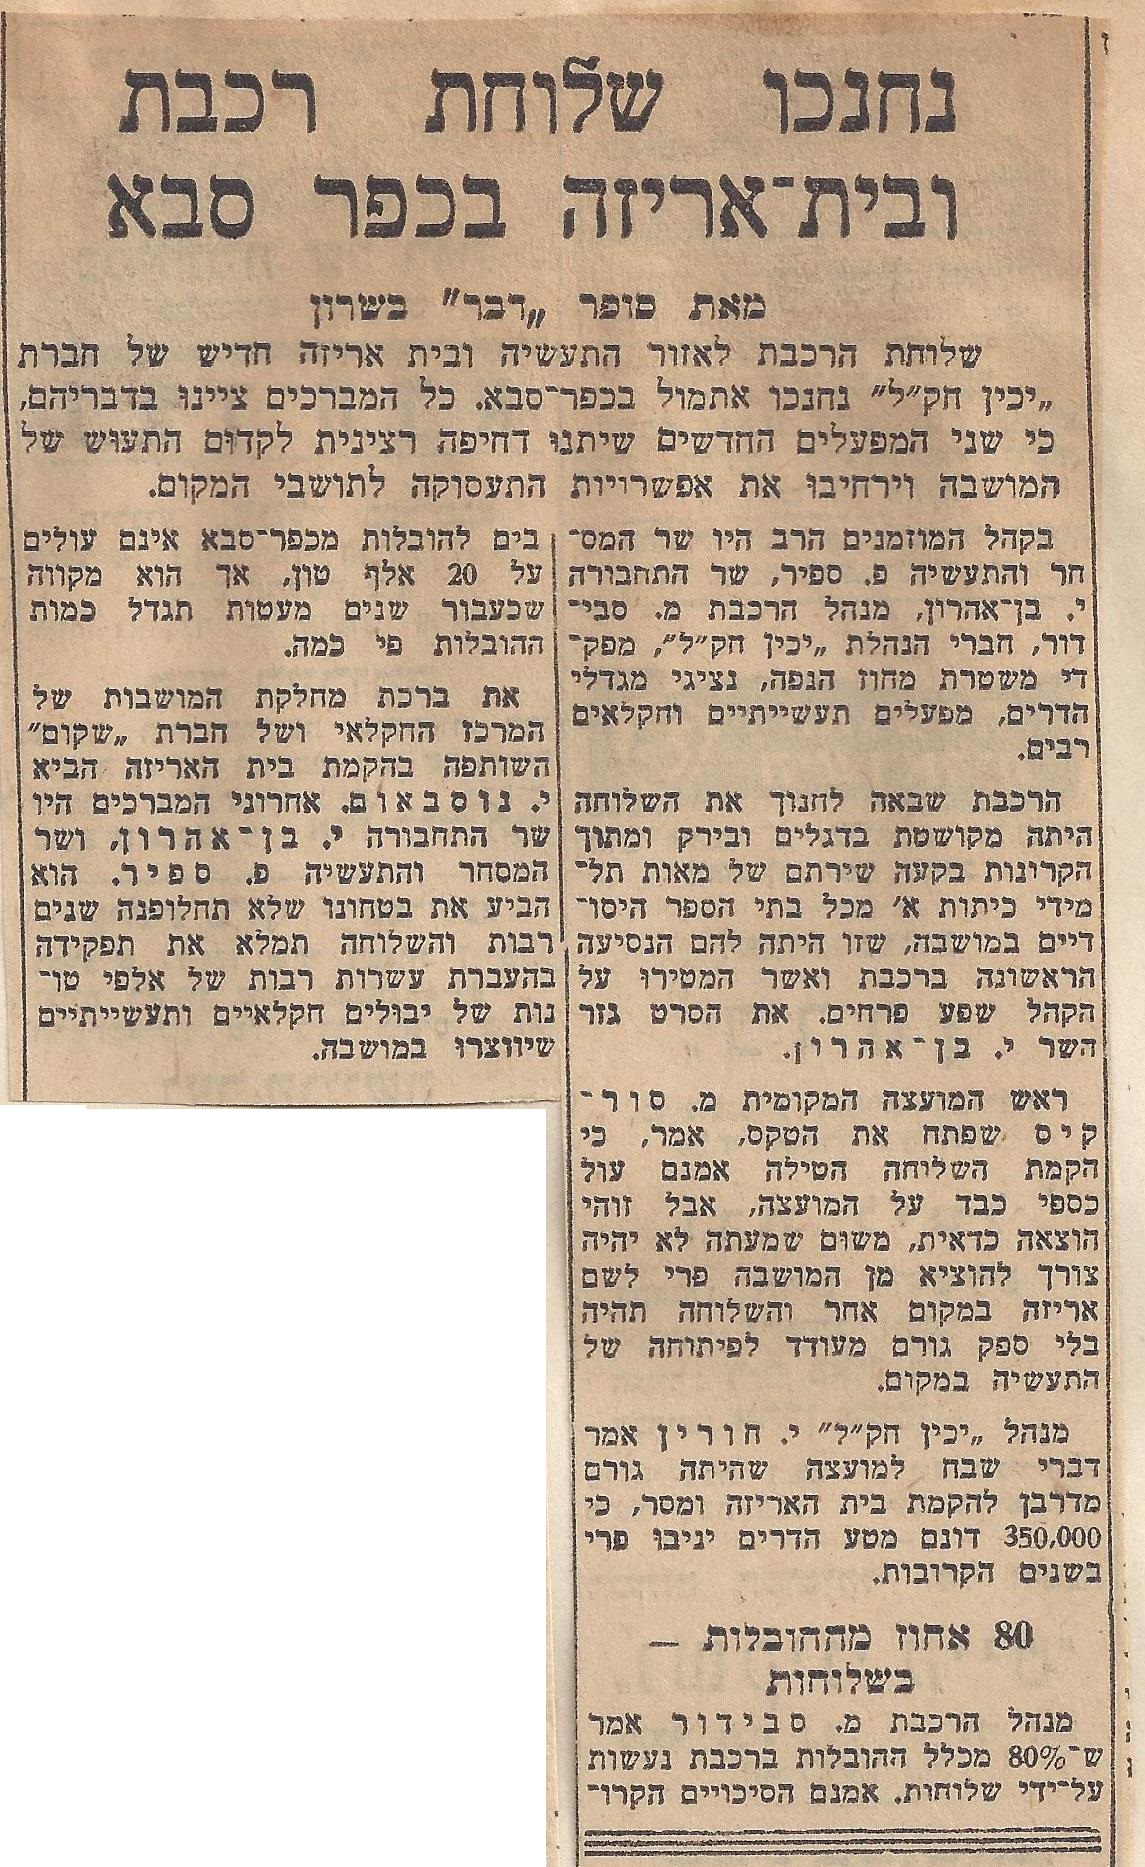 Photo of Davar newspaper article 21/01/1961